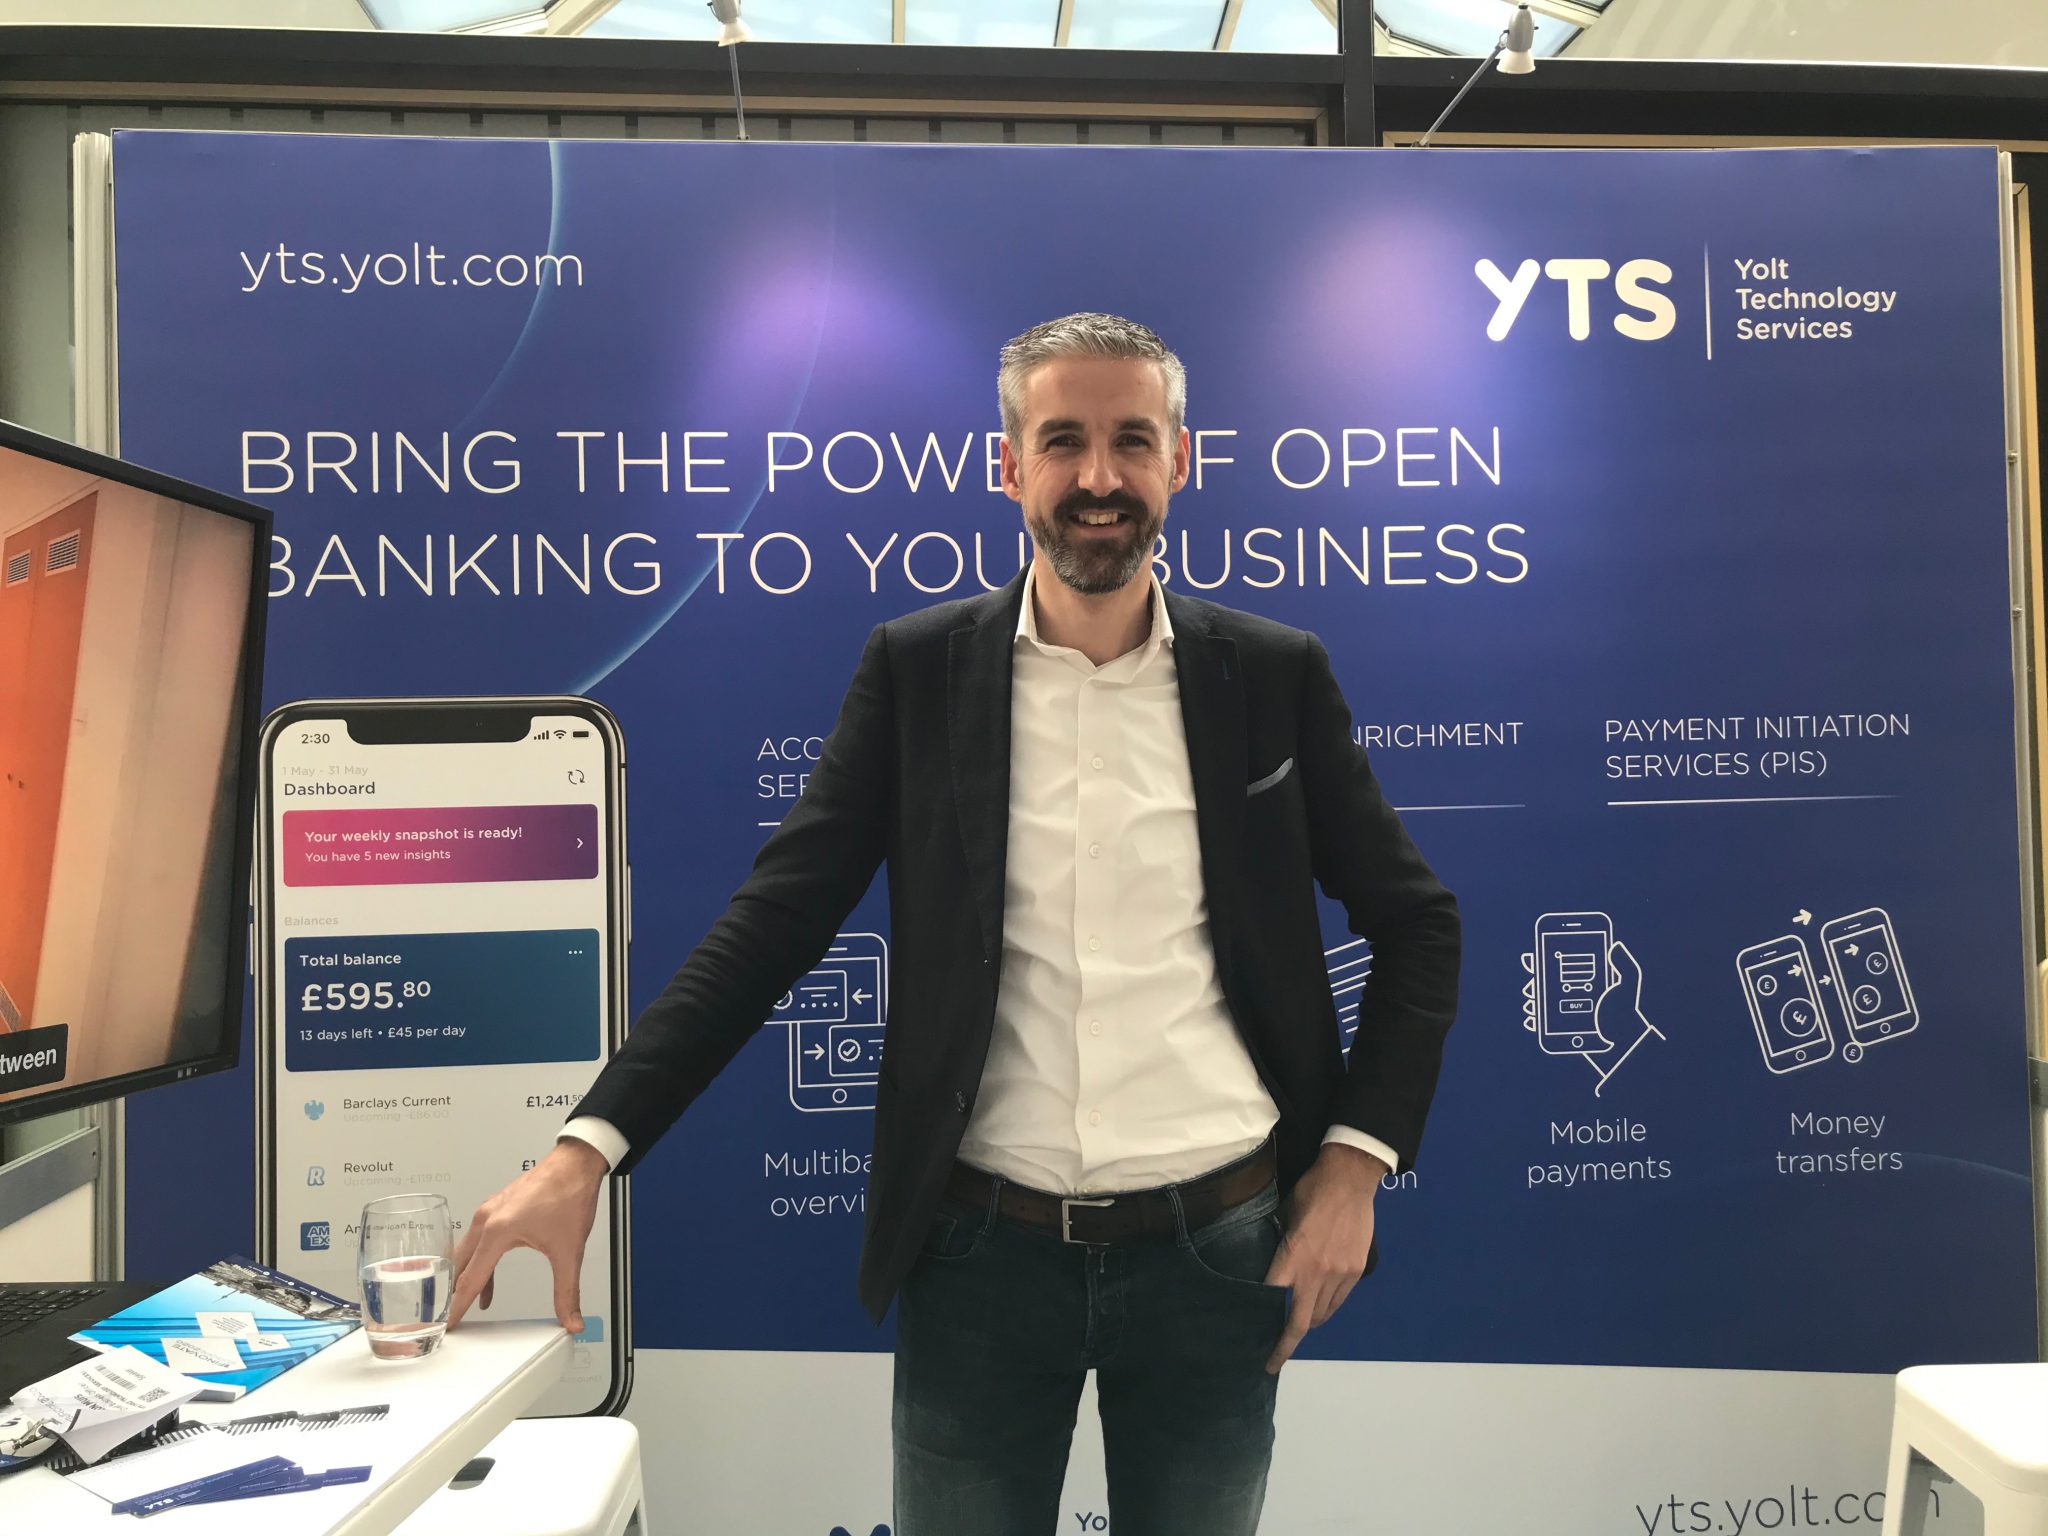 YTS’s chief business officer Leon Muis